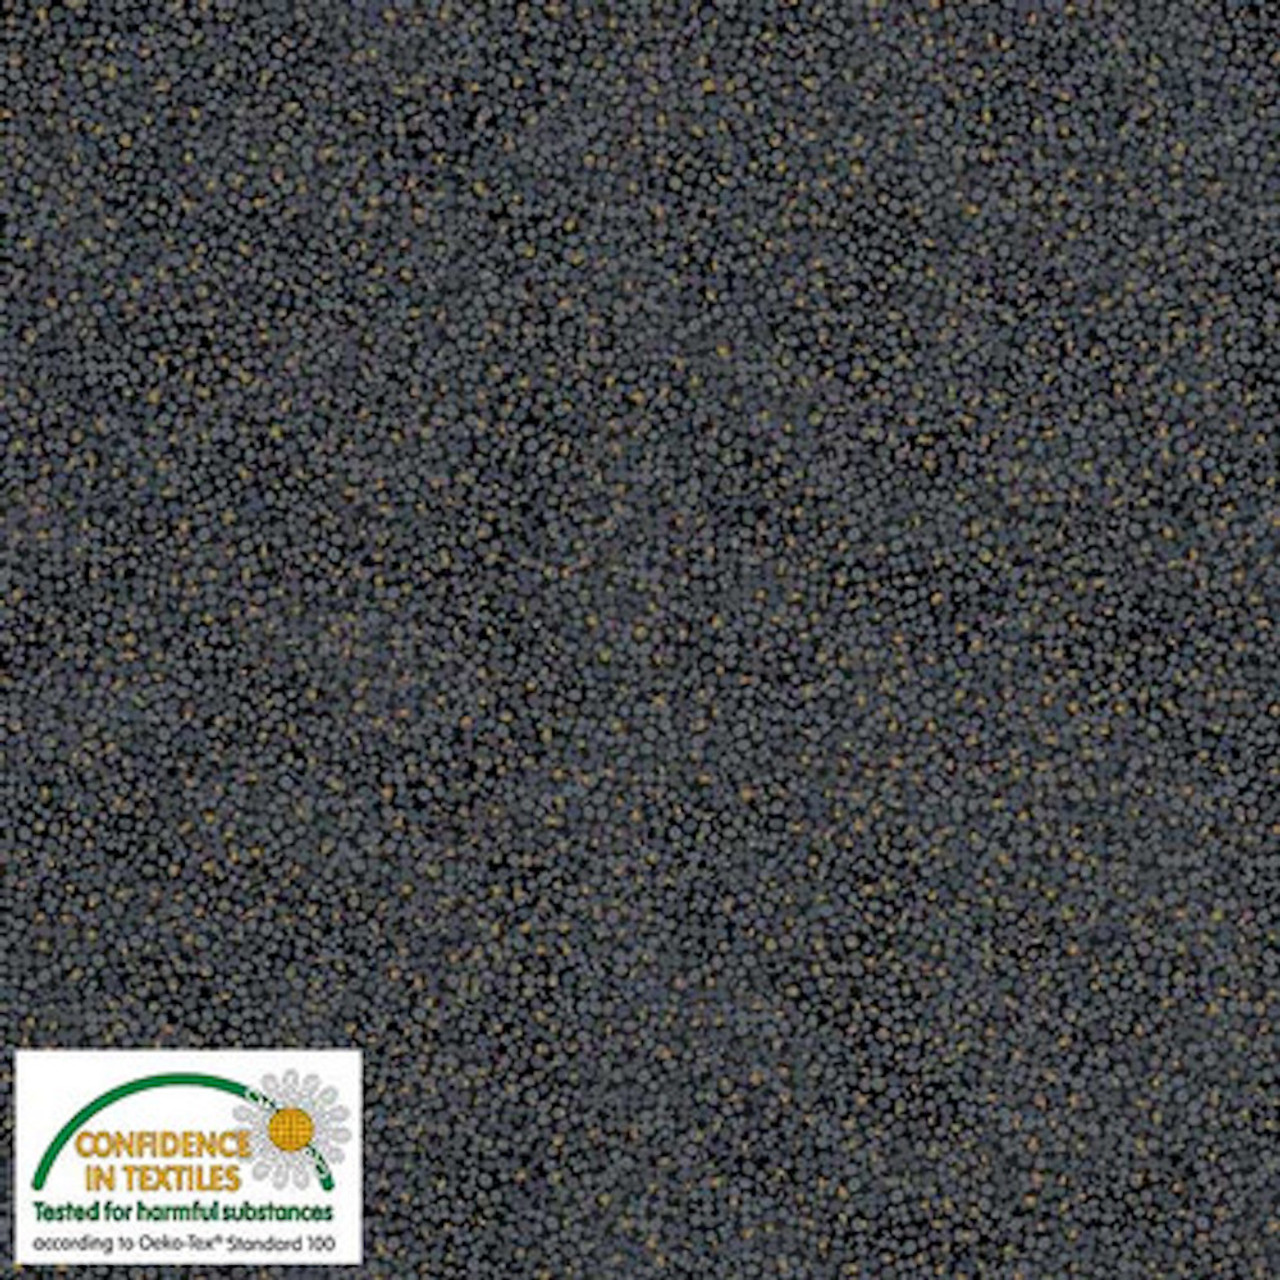 Stof Star Sprinkle Dust Sprinkles Black Gold Cotton Fabric By The Yard